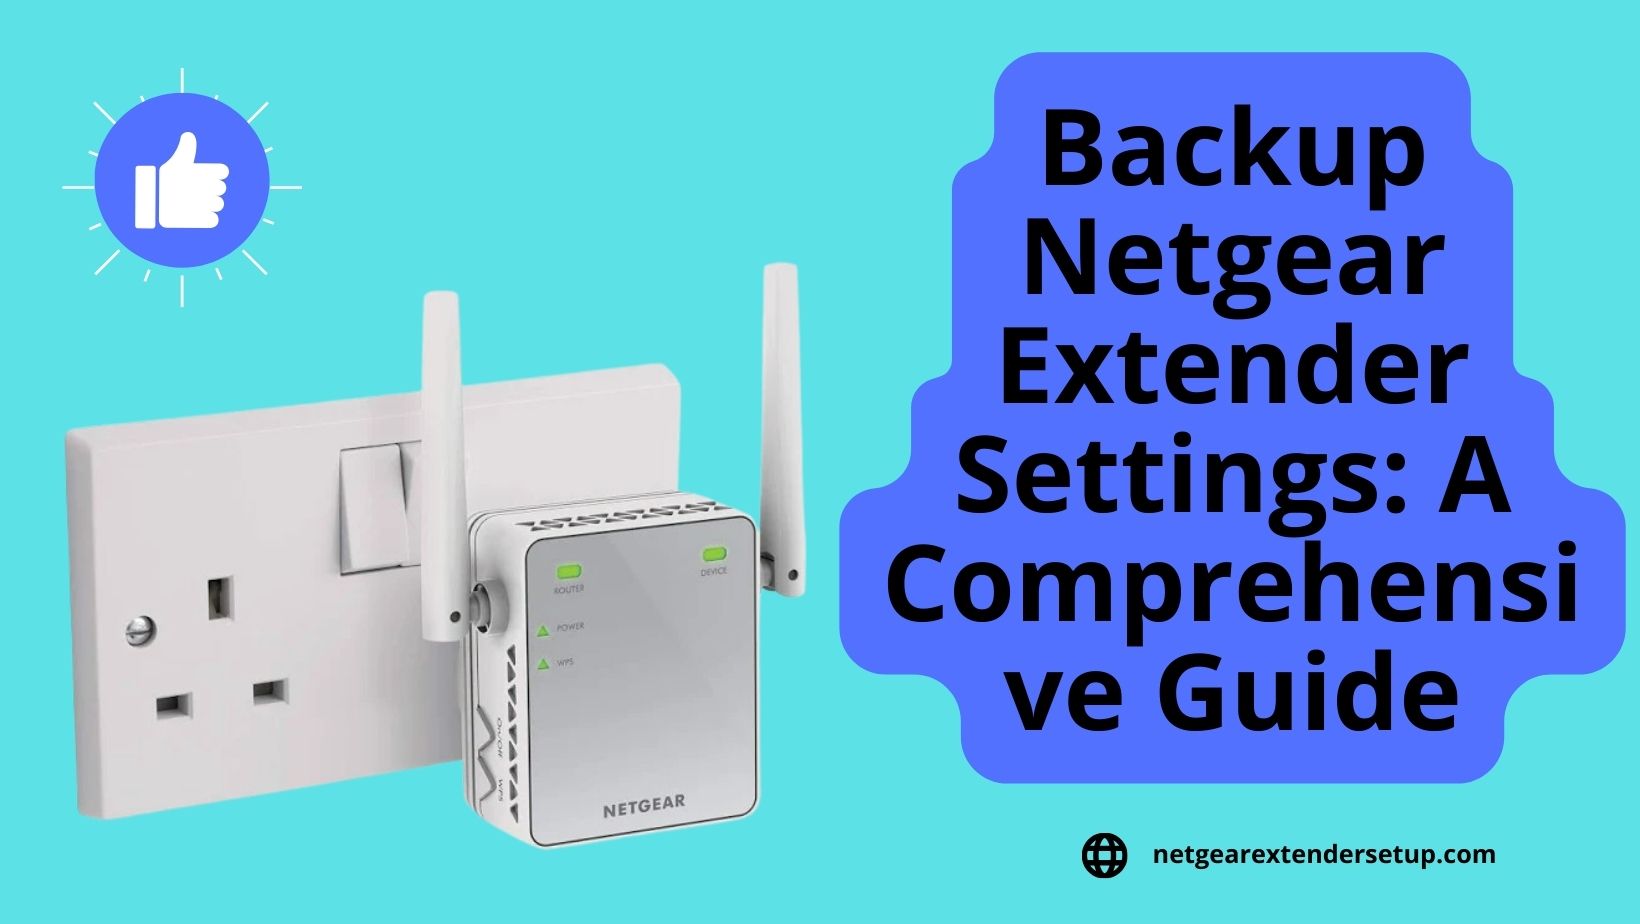 You are currently viewing Backup Netgear Extender Settings: A Comprehensive Guide